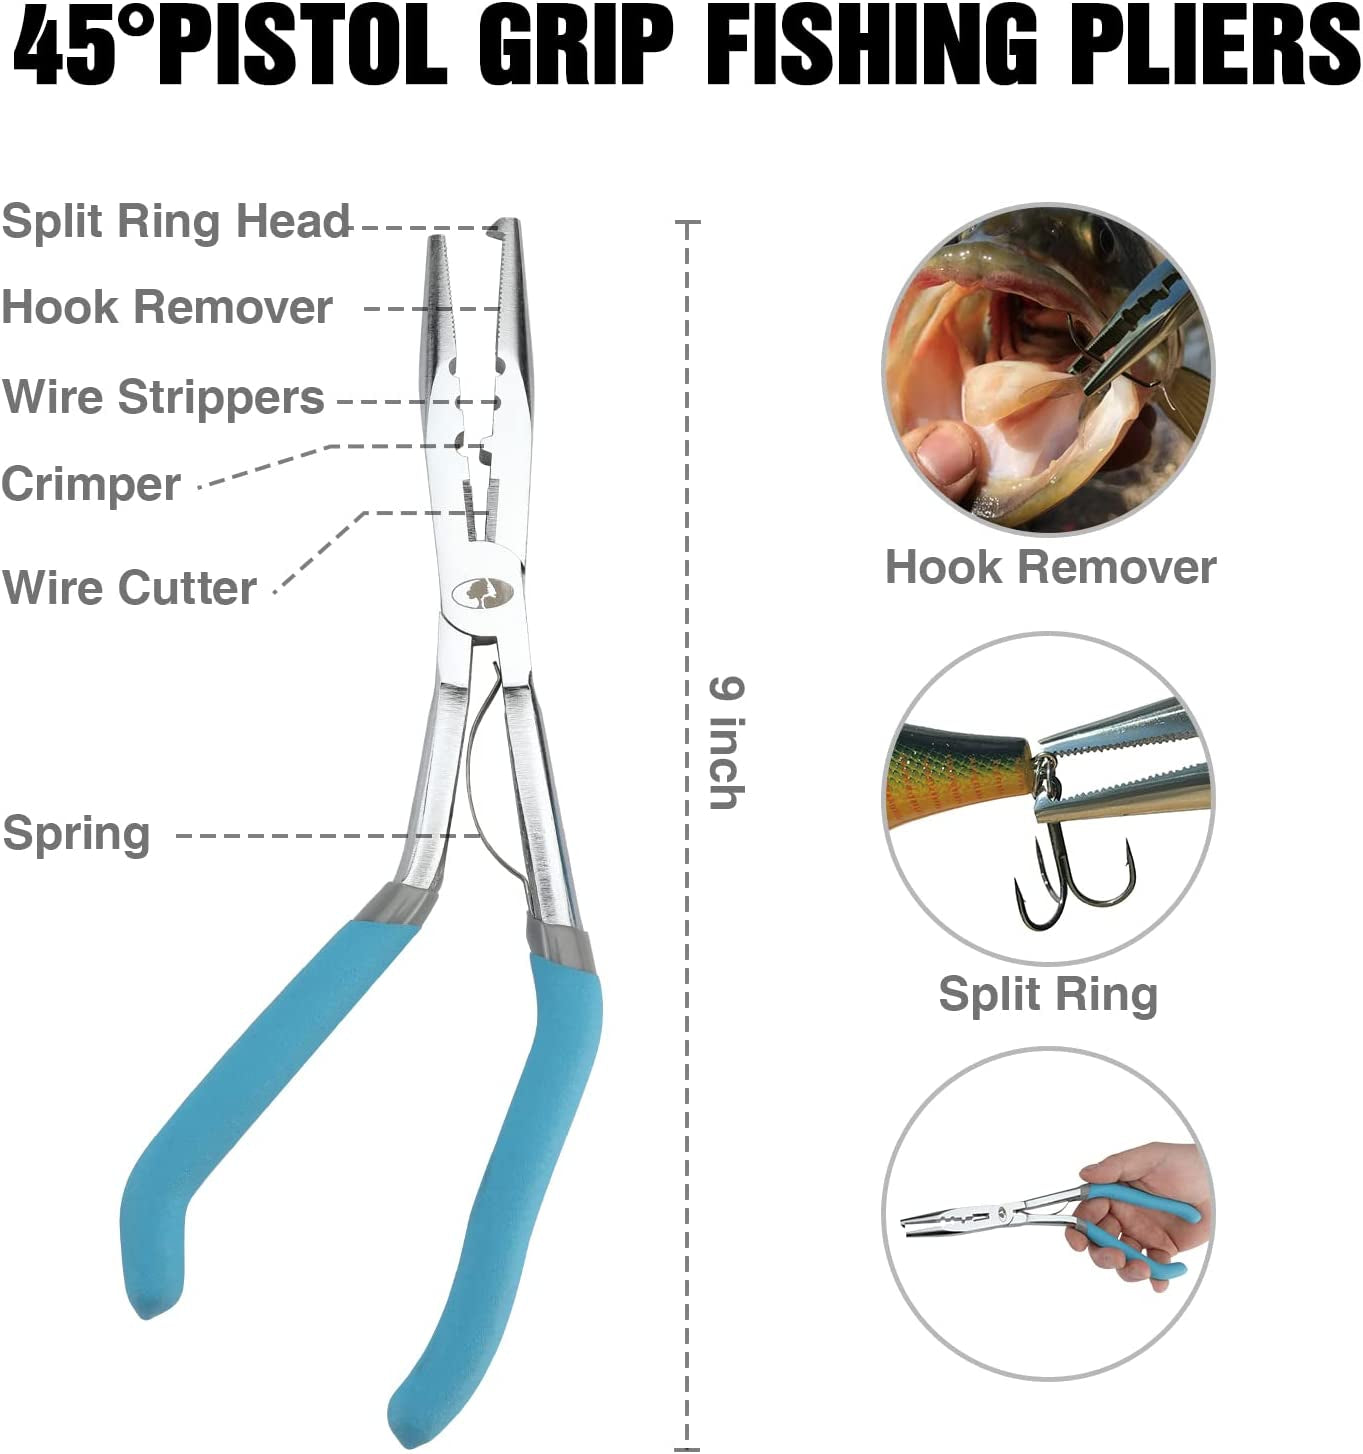 4Pc Fishing Tool Kit - Pistol Grip Fishing Pliers, Fish Fillet Knife, Fishing Gripper, Line Snip, Fly Fishing Retractor with Retractable Lanyard